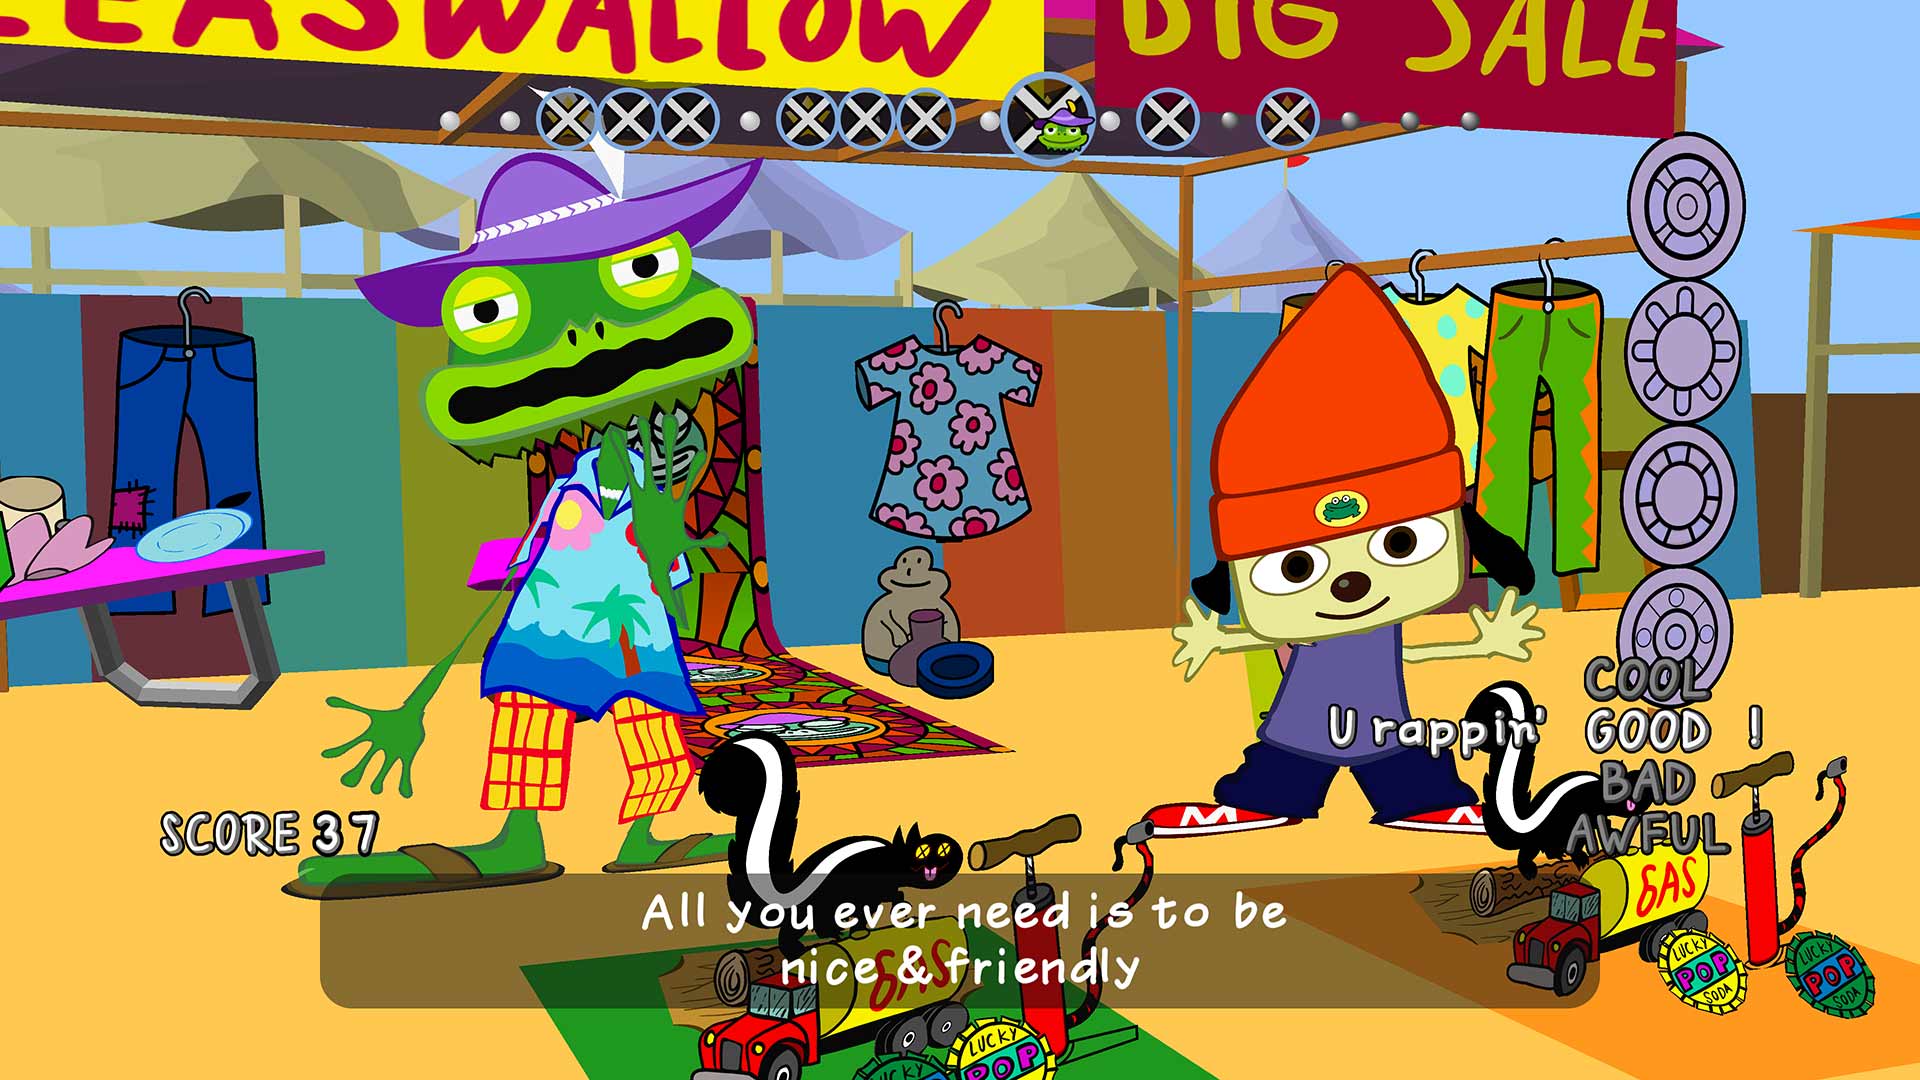 The PlayStation Classics: PaRappa the Rapper PlayStation Classic